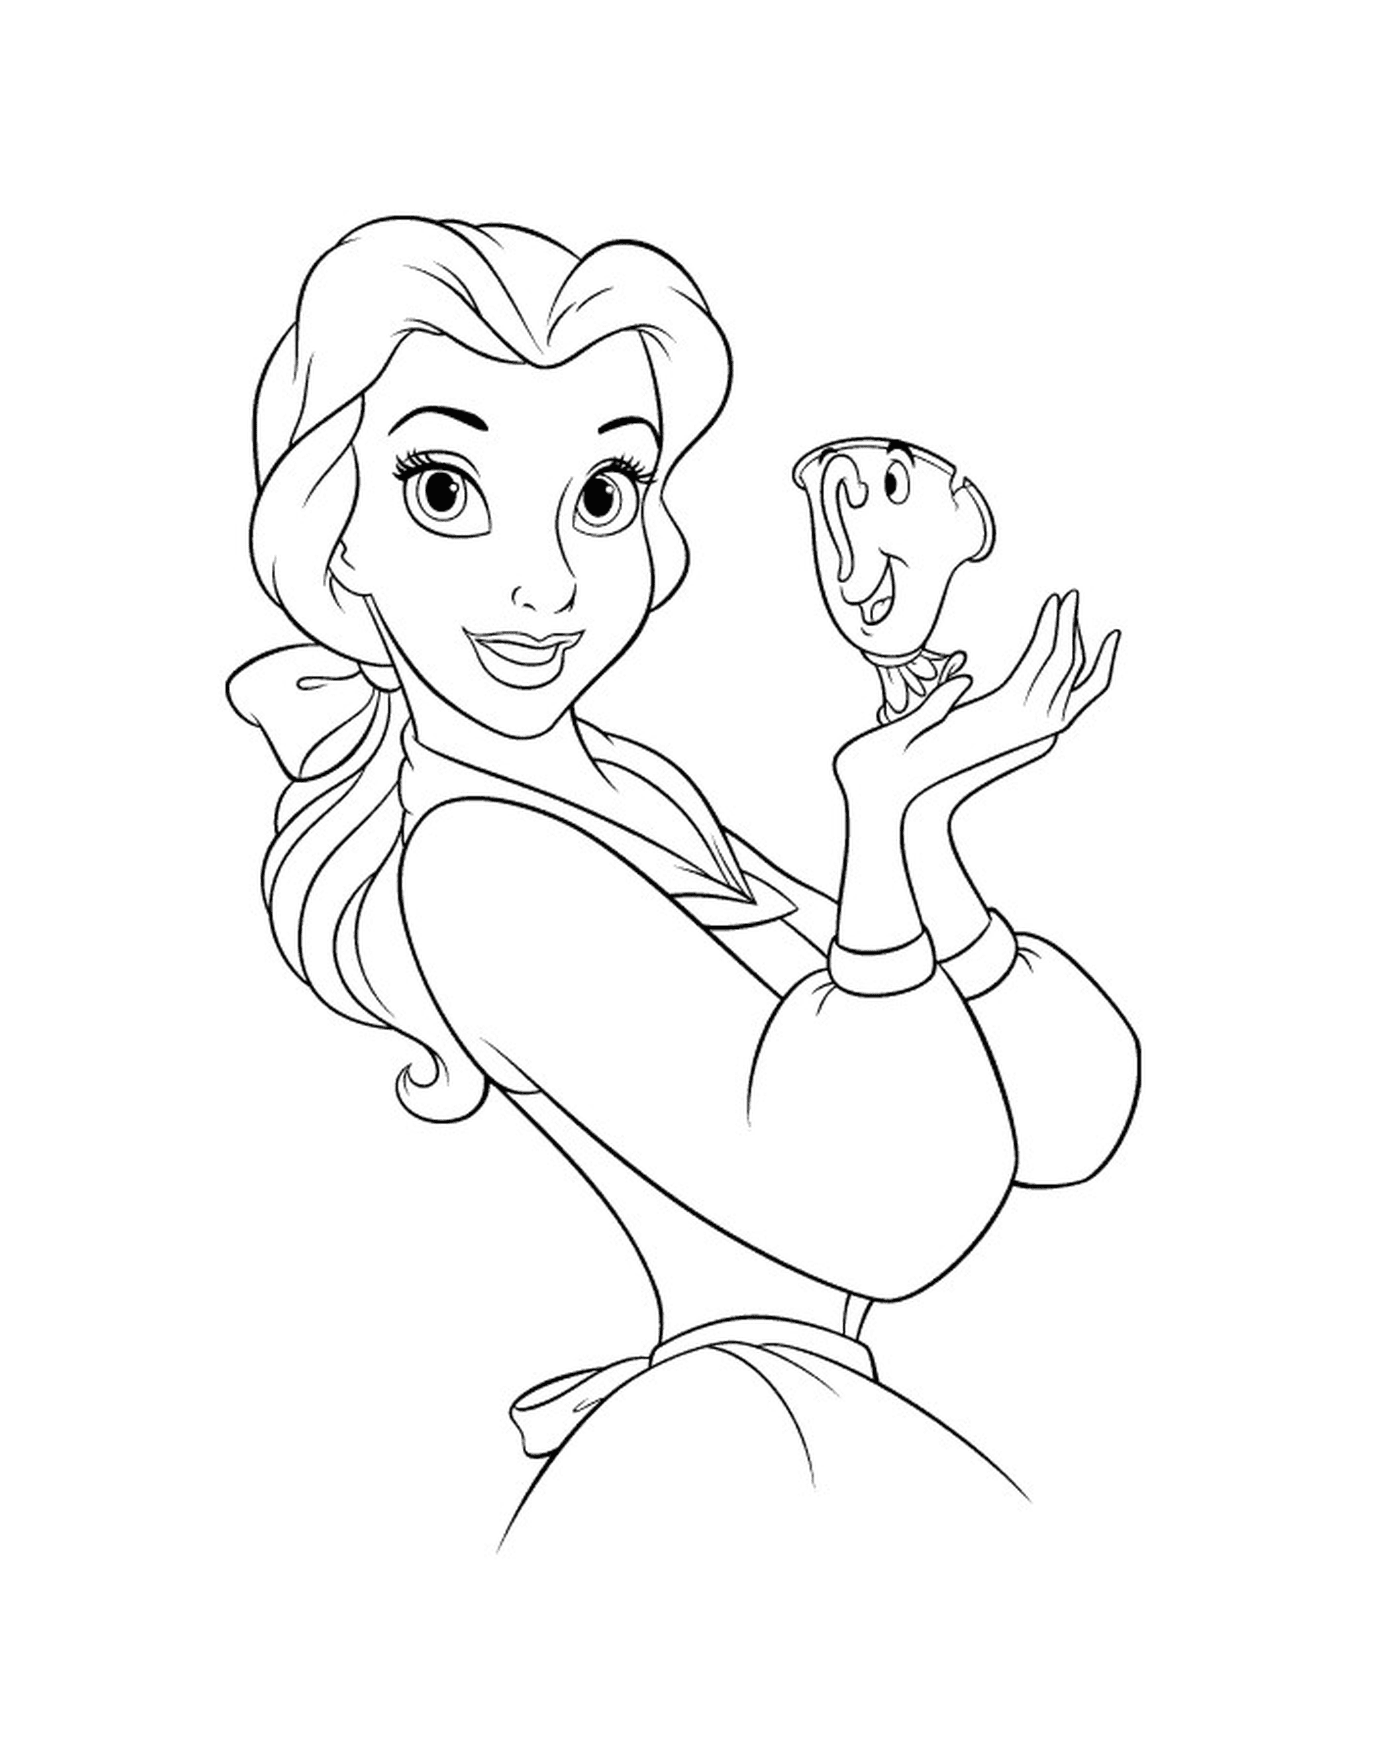  Princess Belle with a cup of tea 